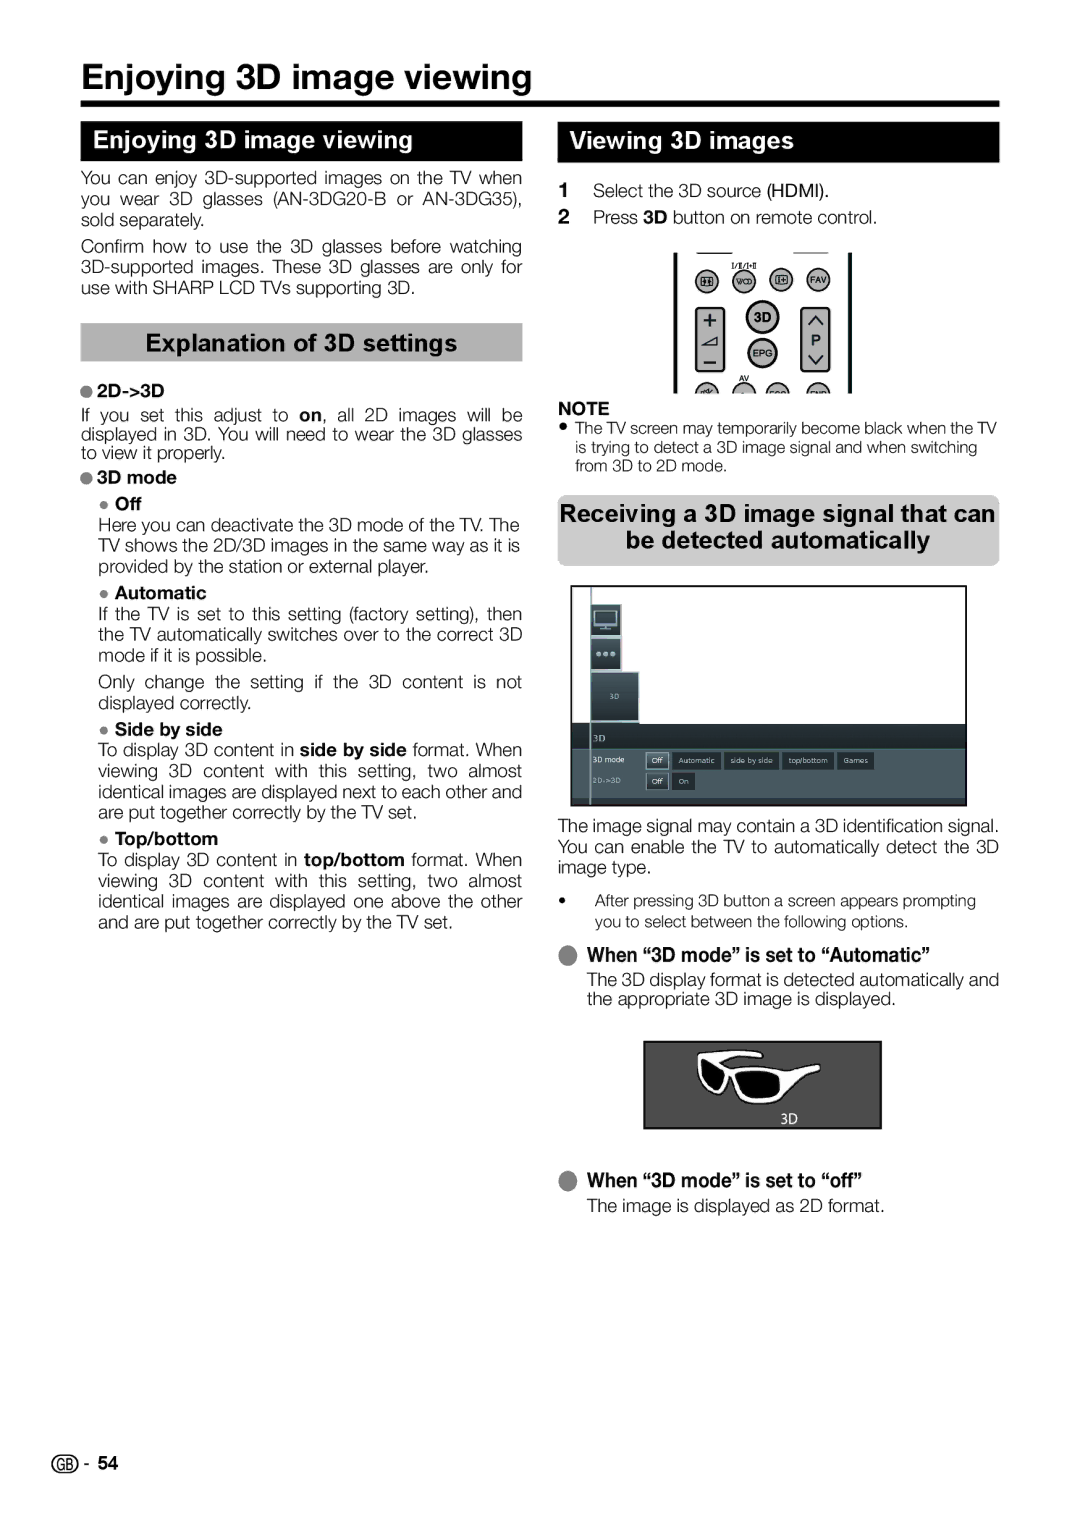 Sharp LCD COLOUR TELEVISION operation manual Enjoying 3D image viewing, Explanation of 3D settings, Viewing 3D images 